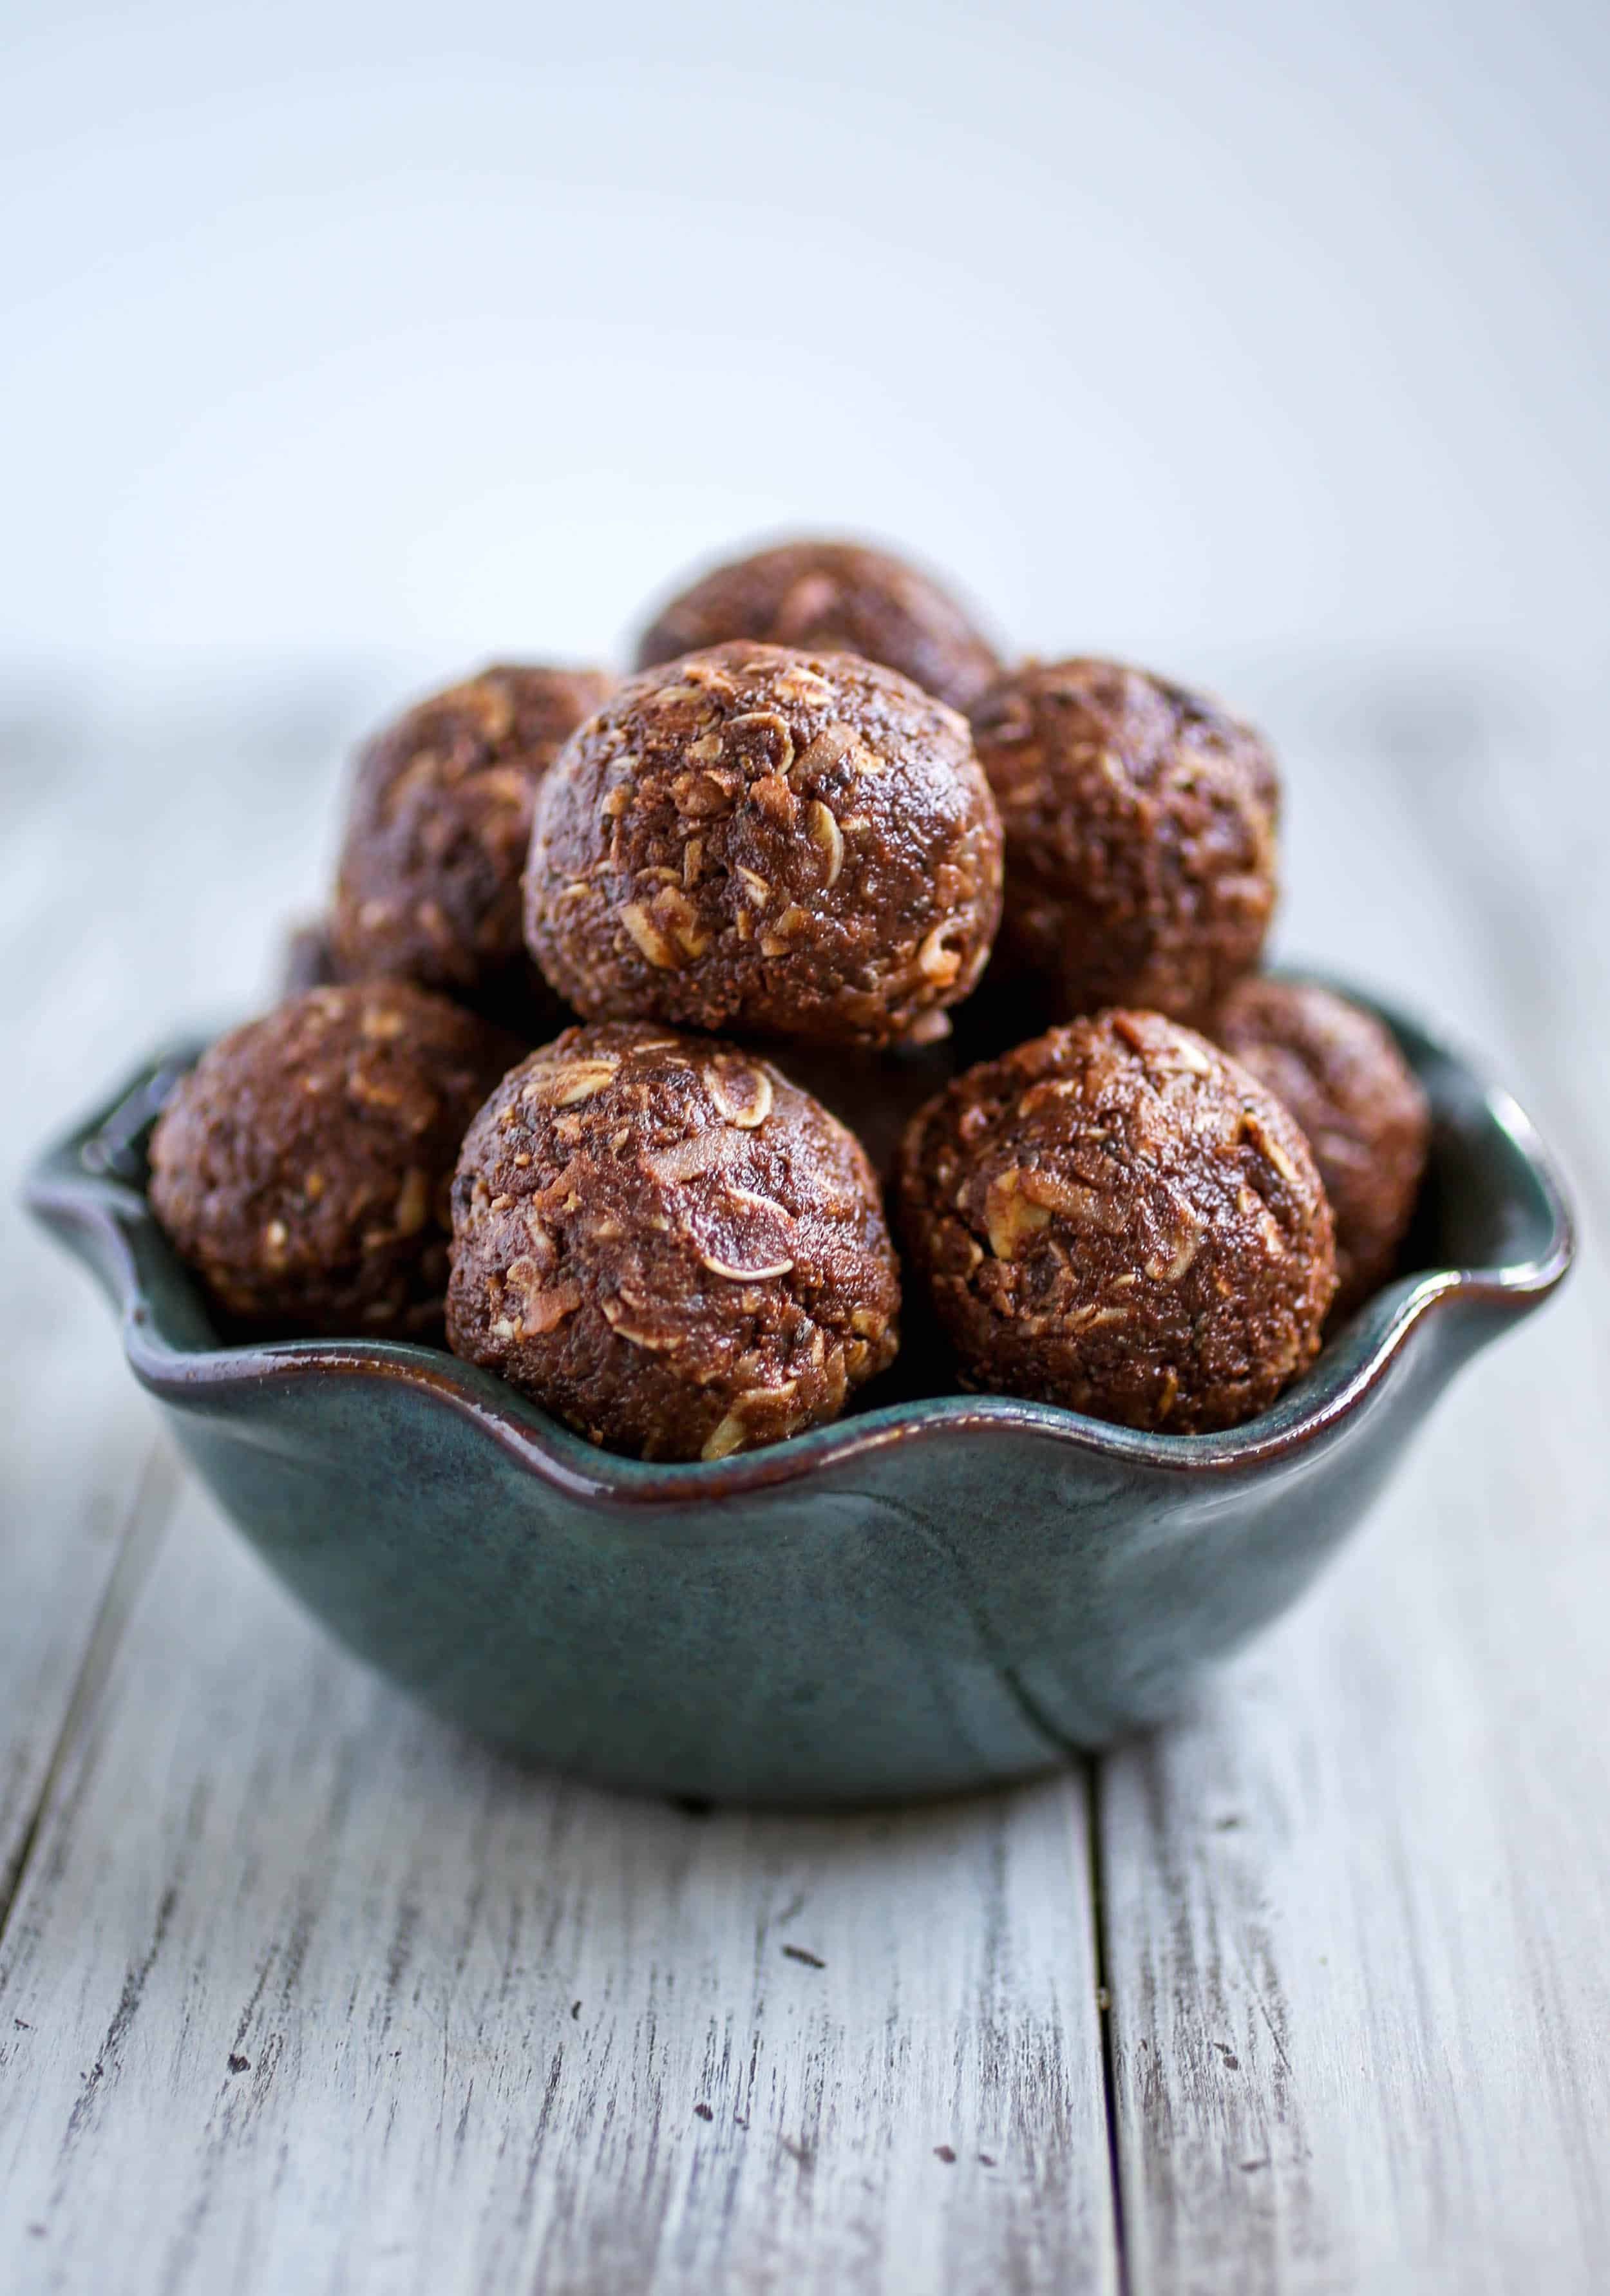 Dark Chocolate Energy Balls - Need a healthier, quick sweet treat? I've got you covered with these Dark Chocolate Energy Balls.